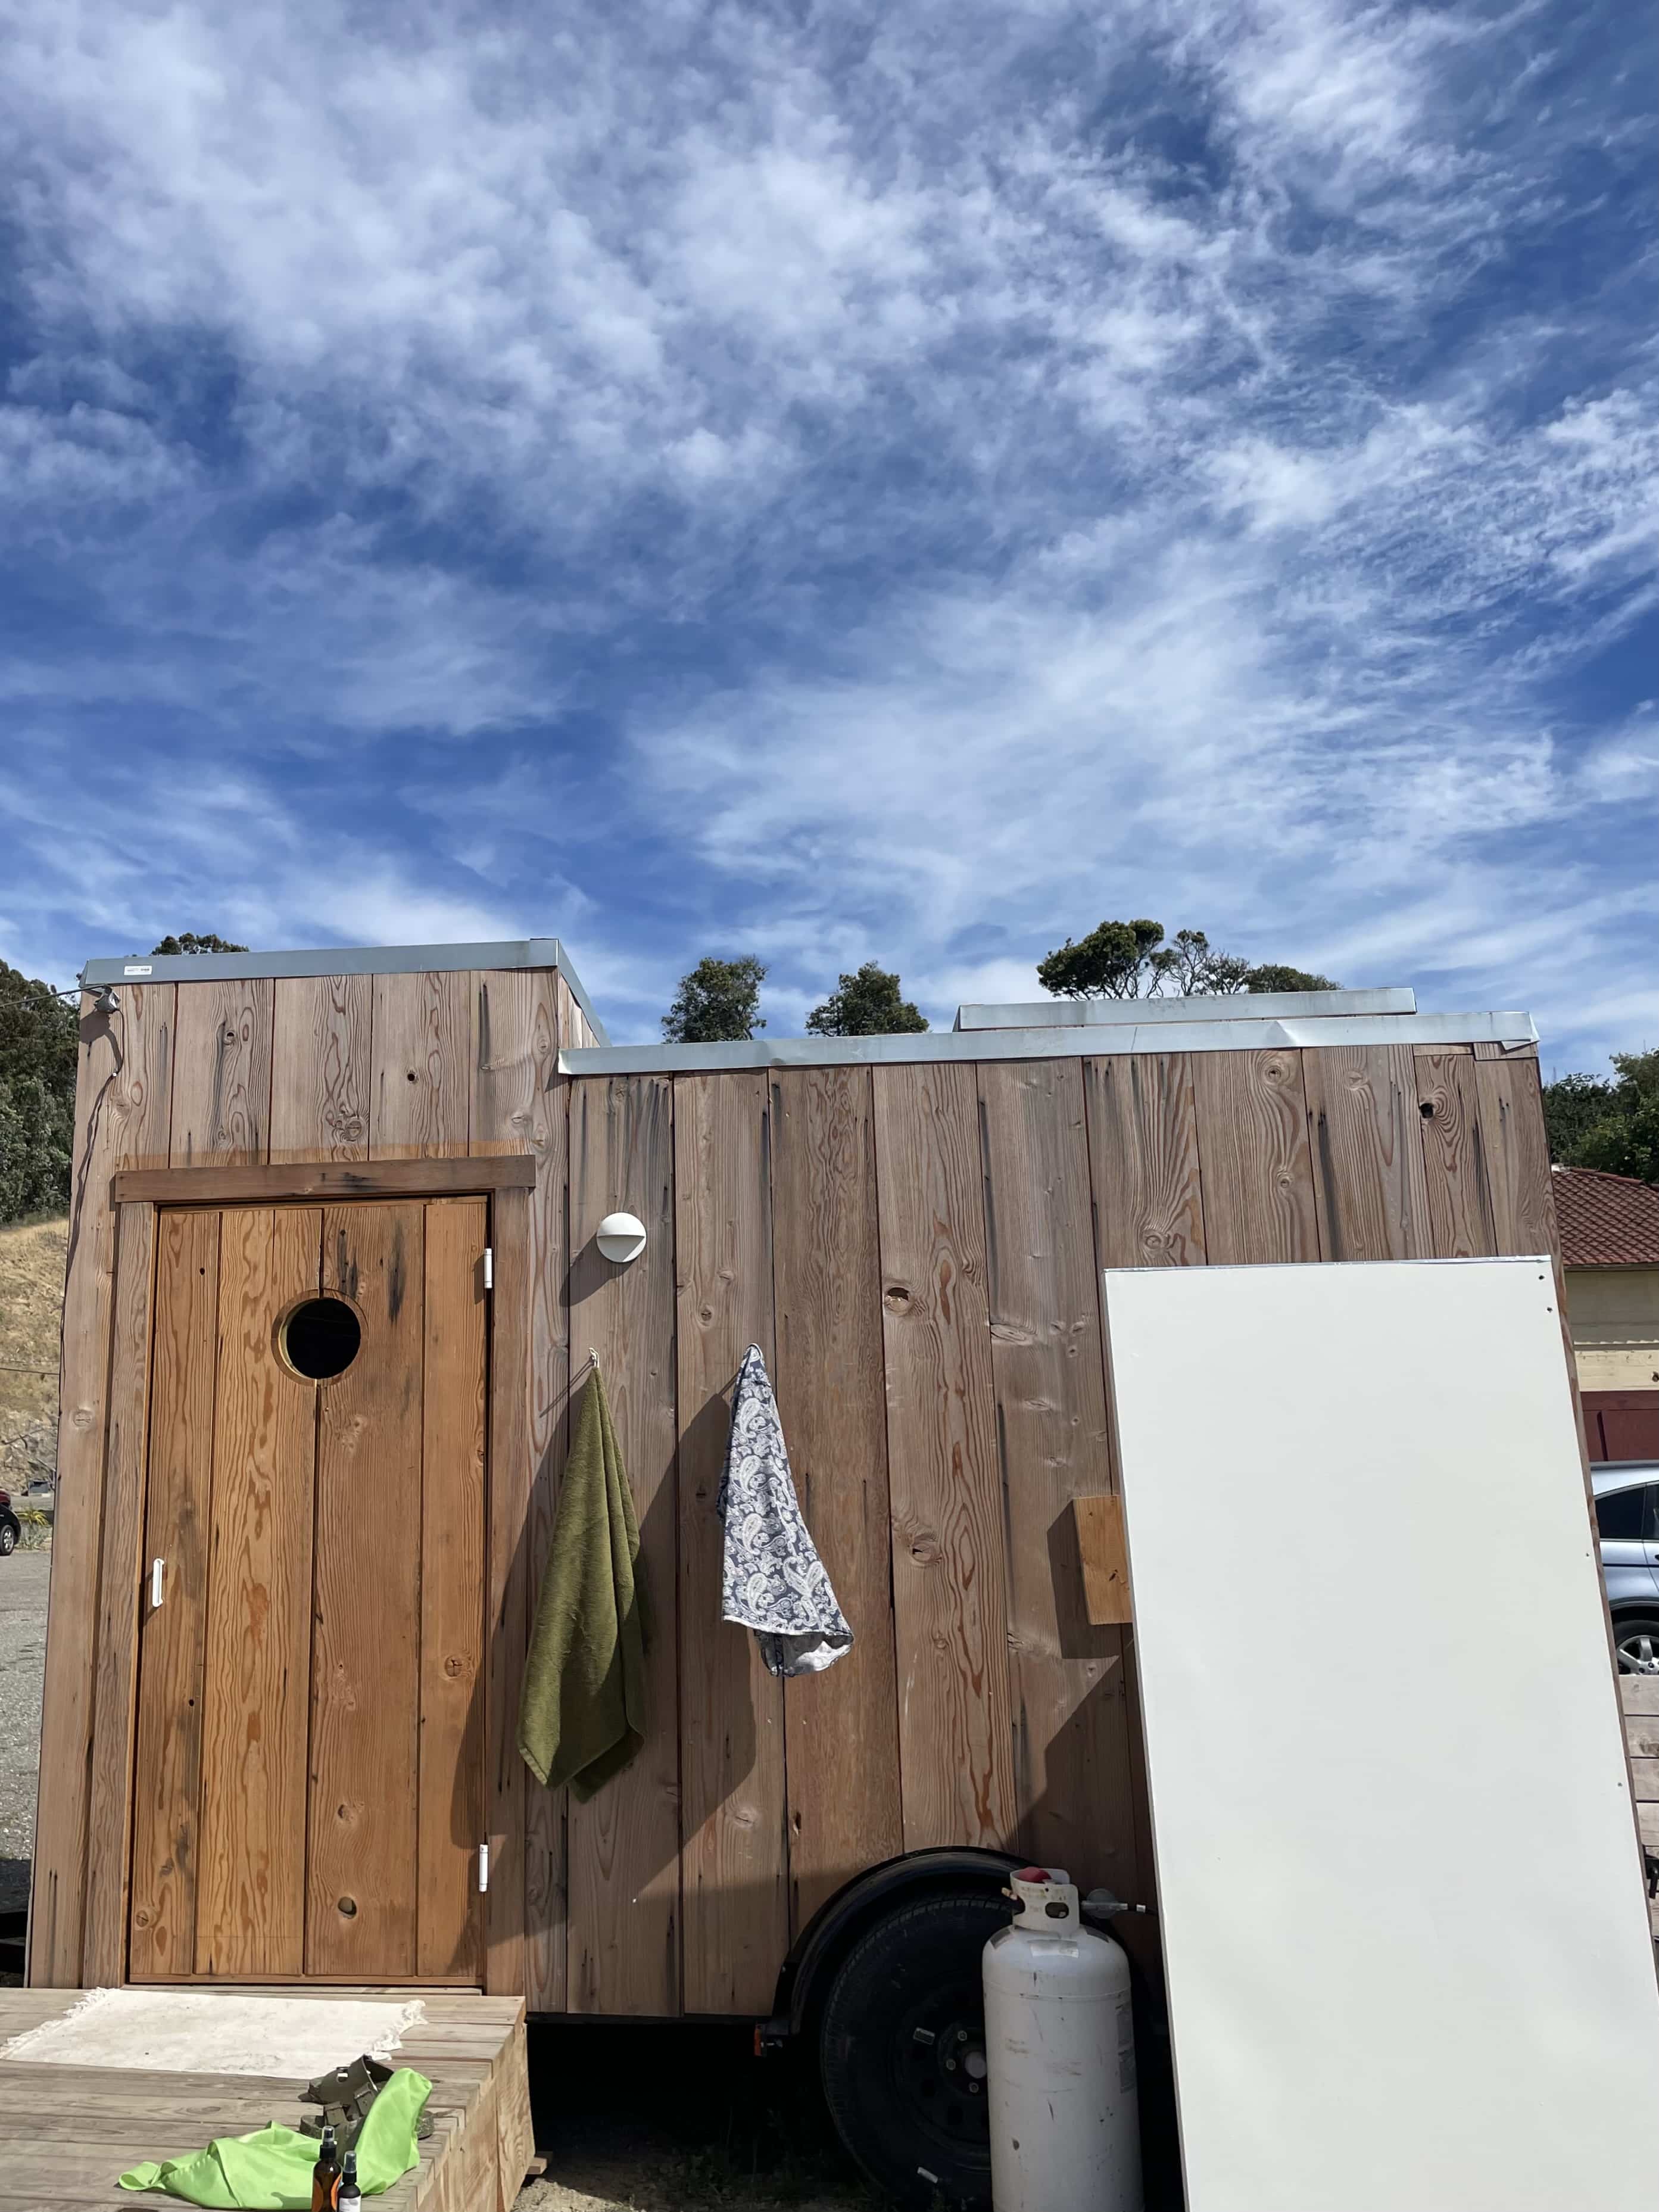 Photo of a small wooden structure with towels hanging from hooks, shot against a blue sky.